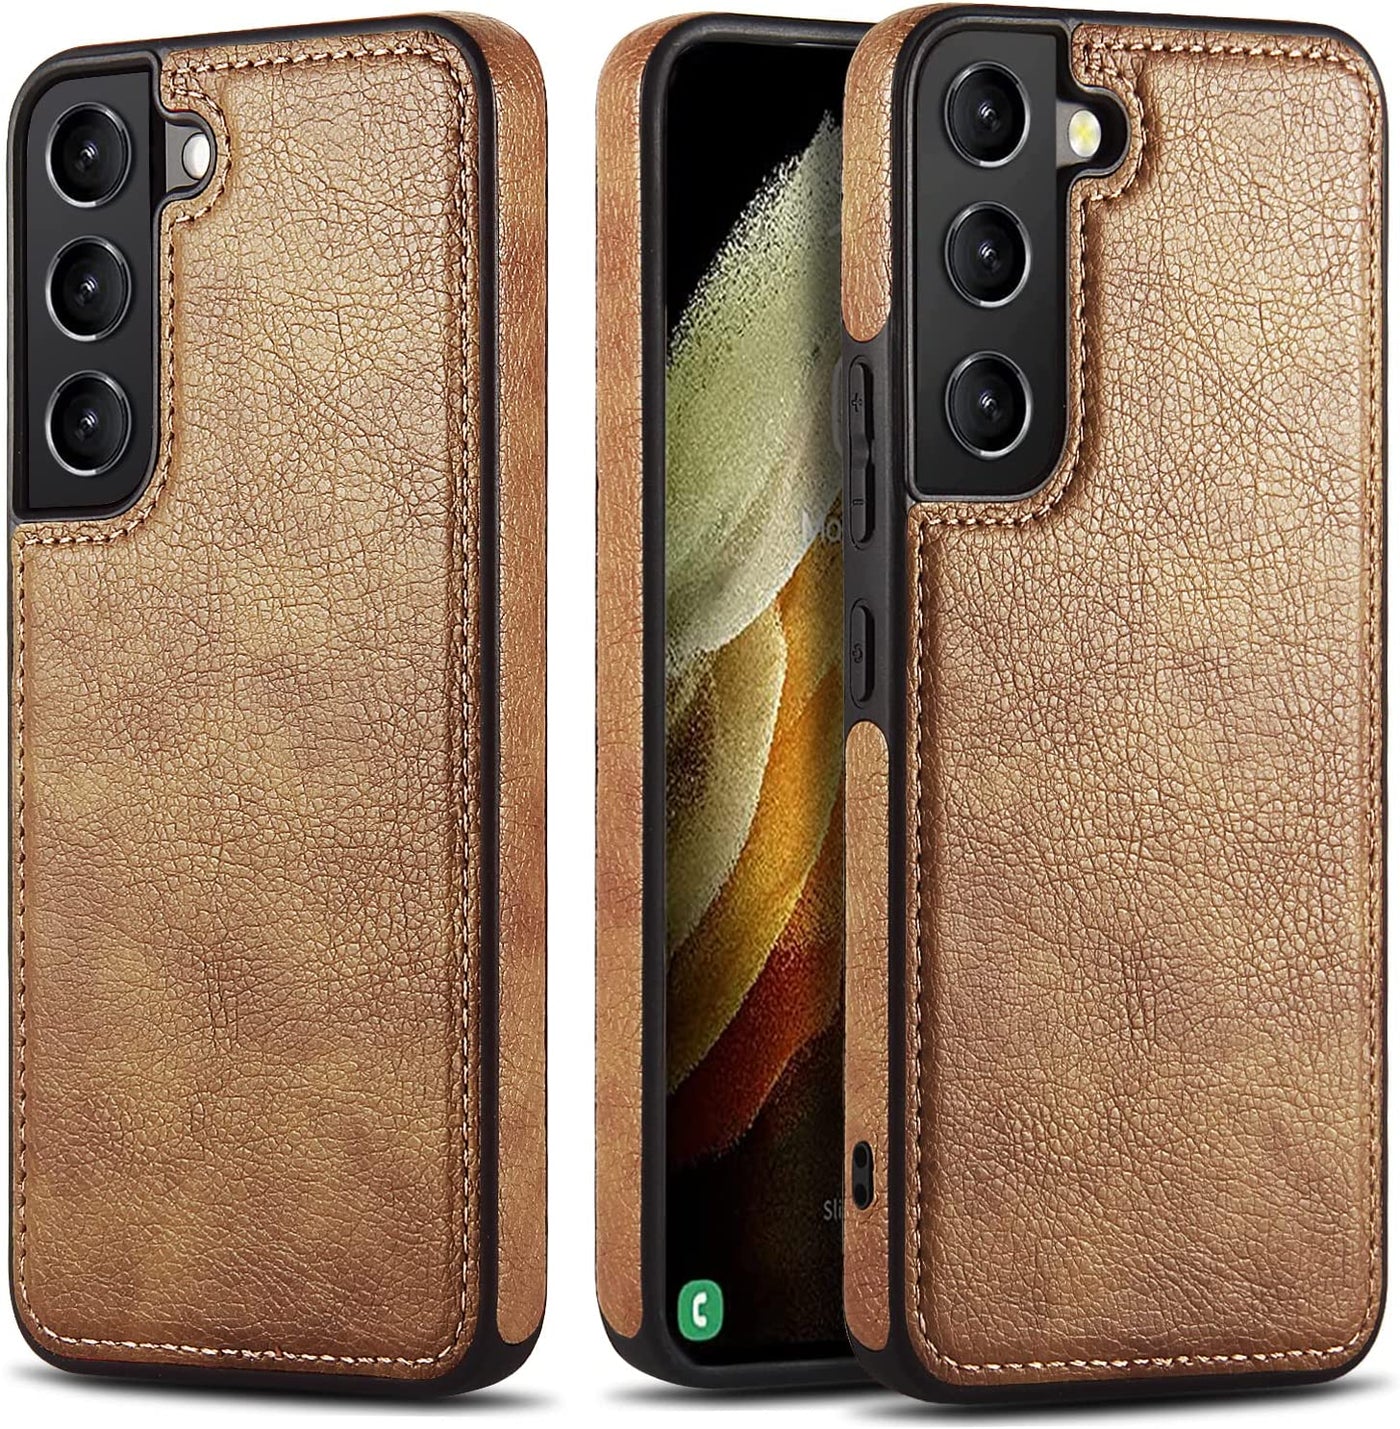 Samsung Galaxy S22 Plus brown color leather back cover case